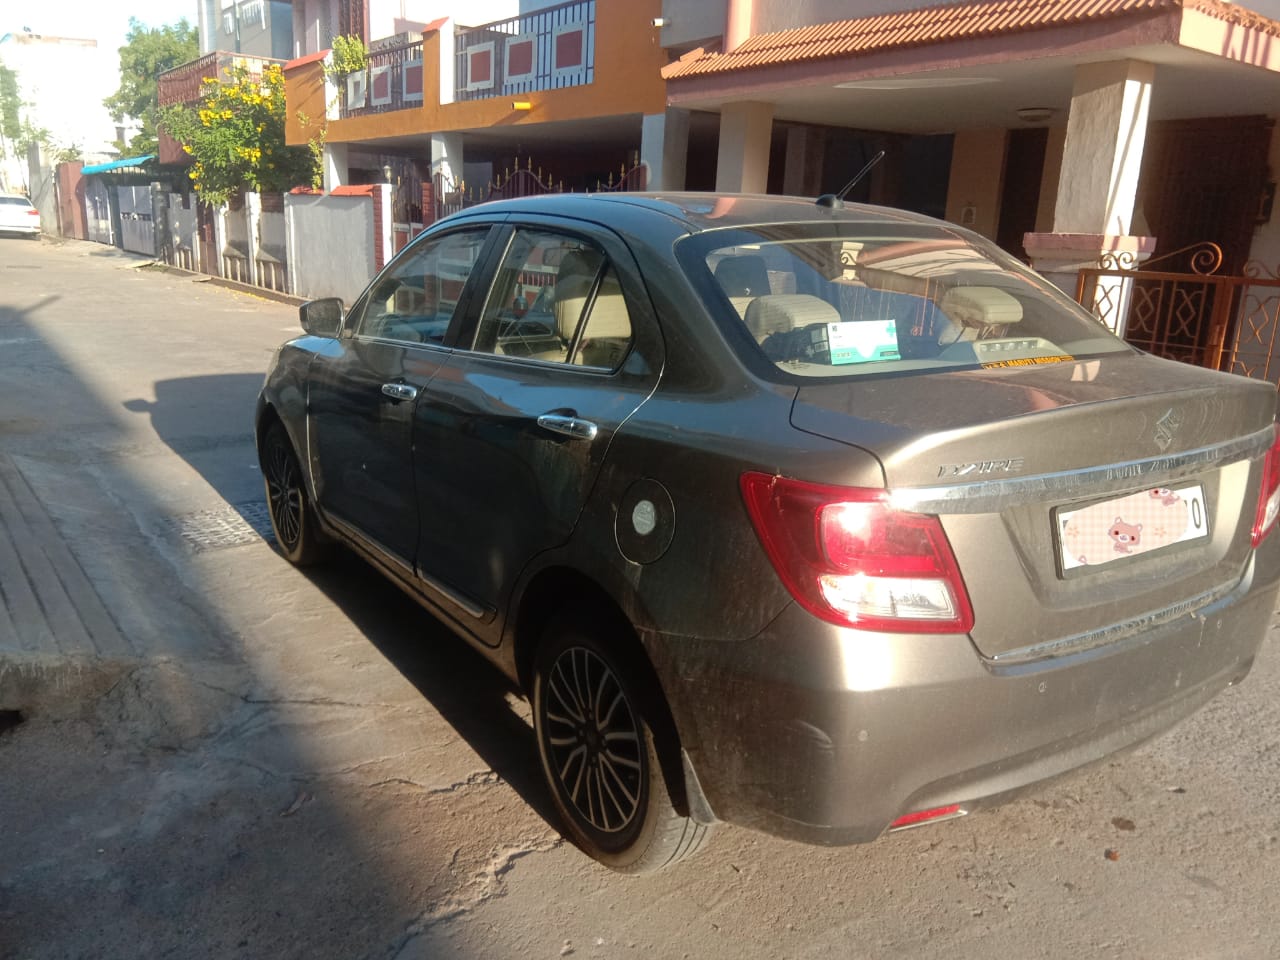 3685-for-sale-Maruthi-Suzuki-DZire-Petrol-First-Owner-2020-PY-registered-rs-0